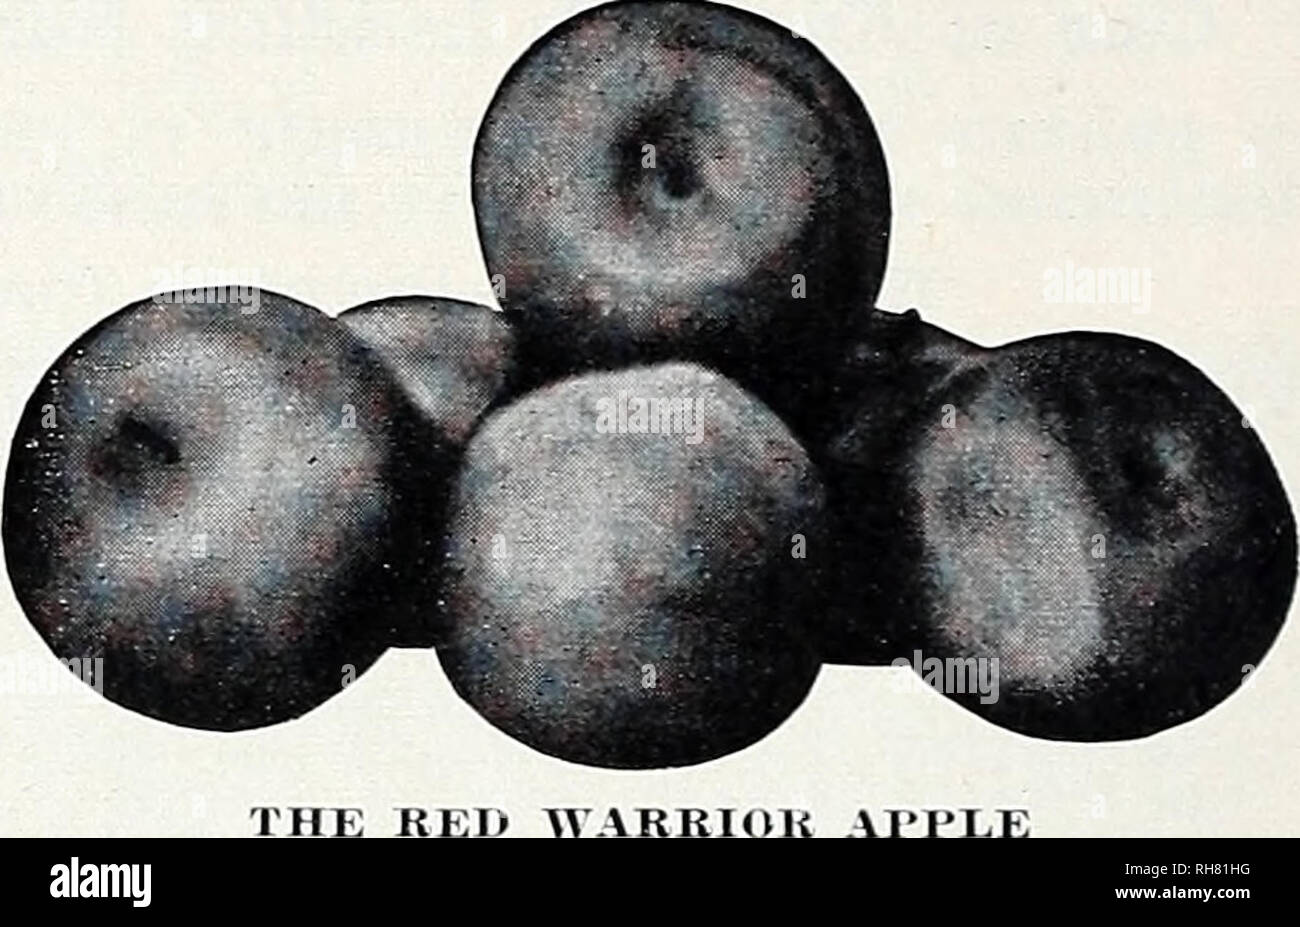 . Bountiful ridge nurseries : our complete catalog and planting guide fall 1956 spring 1957. Nurseries (Horticulture) Catalogs; Fruit Catalogs; Fruit trees Catalogs; Trees Catalogs; Flowers Catalogs. ^ RED WARRIOR (6a) THE LODI APPLEâPhotograph of Lodi Apple on experimental orchard of t'niTersity of Ifd. Note s miform shape. LODI (Big Transparent) (:^&gt; I.ODI IS ONE or OUK BEST EARLY APPIJ Large Size, Firmness and Early Bearing Habits Recommend it It's beautitul all-oei l)iiicht led Kilor 1 irjce quality should make it i leadei The tree is normallT iâ(irou&gt; .kiwv naturall similai to Ale Stock Photo